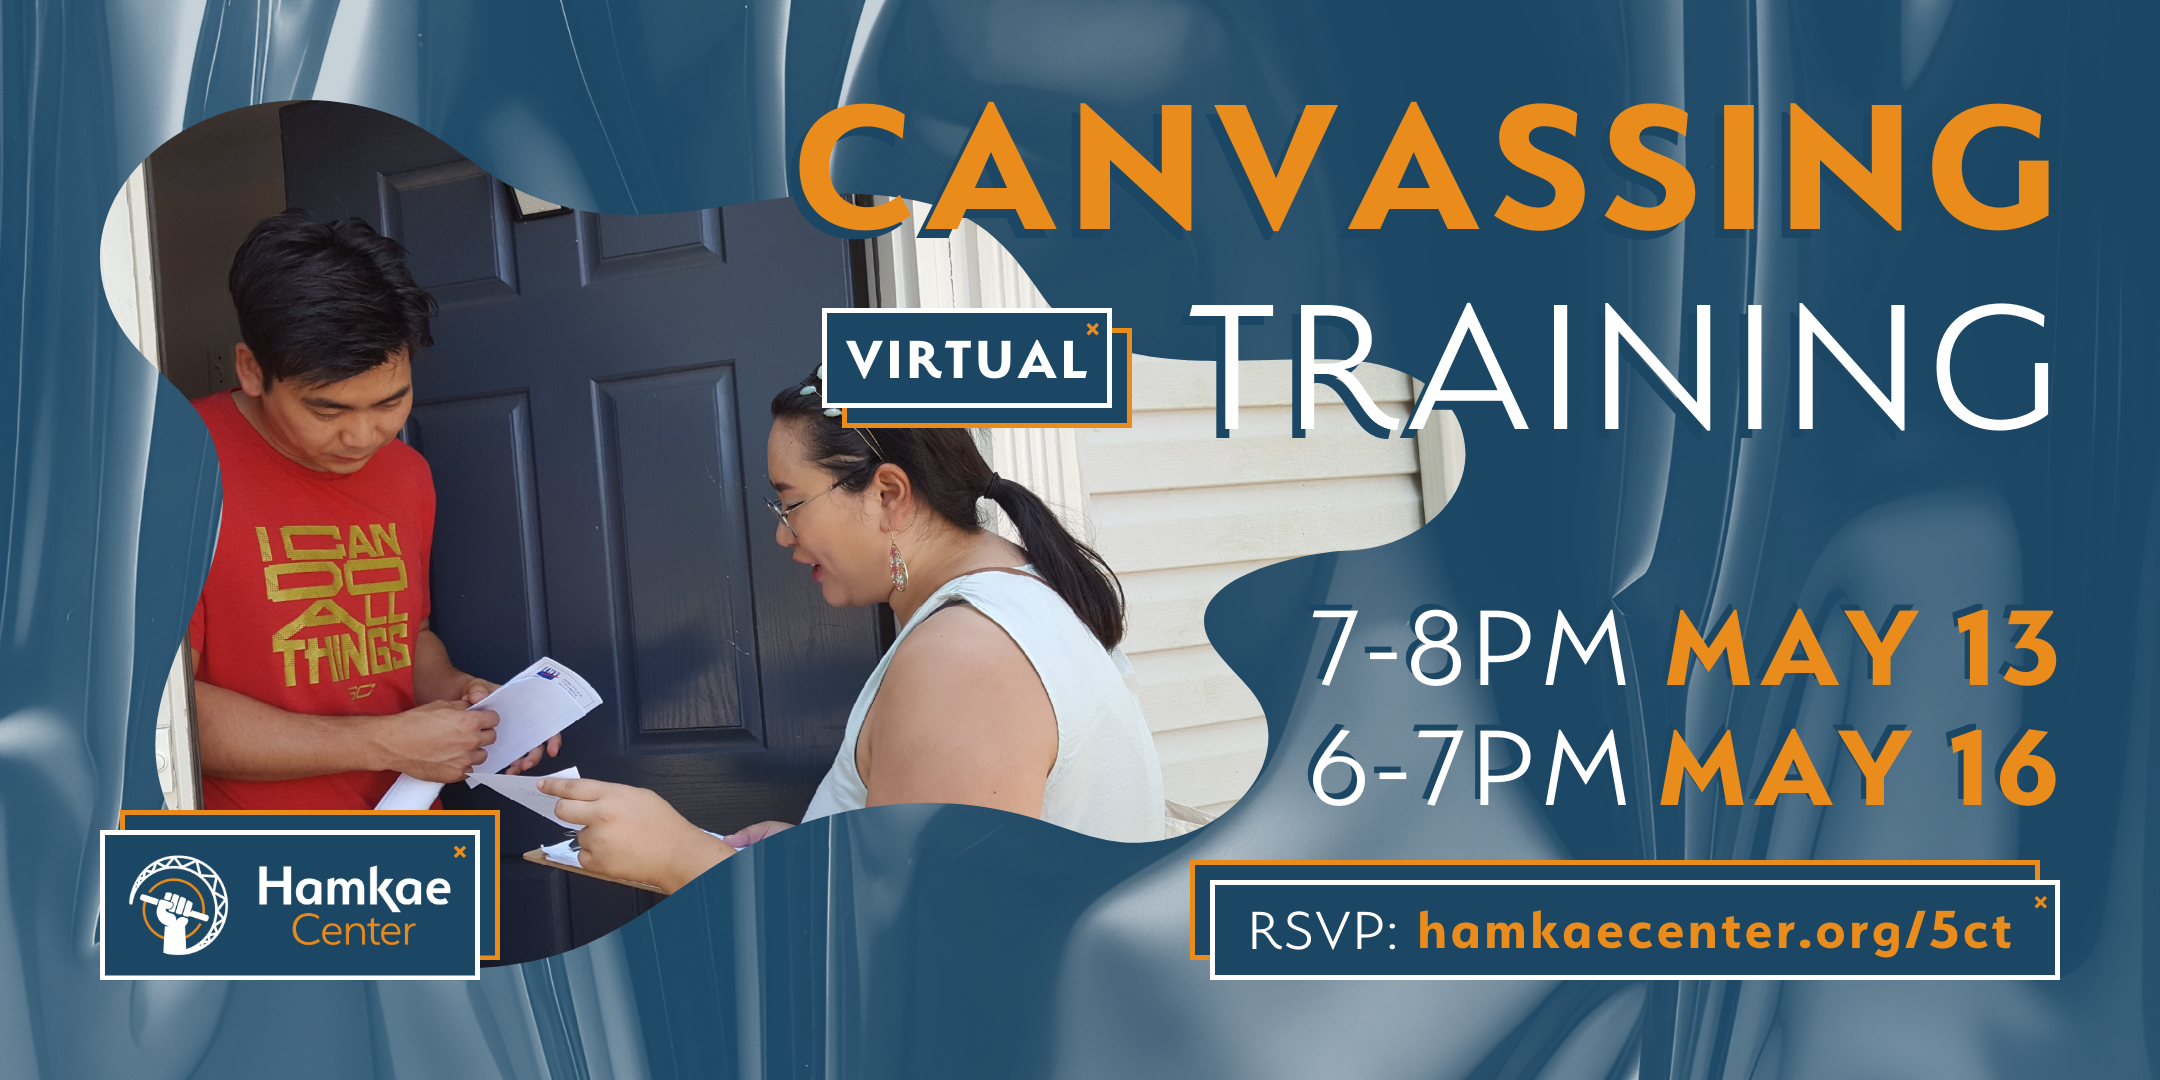 Hamkae Center Virtual Canvassing Training 7-8pm May 13 6-7pm May 16 RSVP: hamkaecenter.org/5ct Photo of a person speaking and holding flyers at a doorstep, while another person at the door reads.